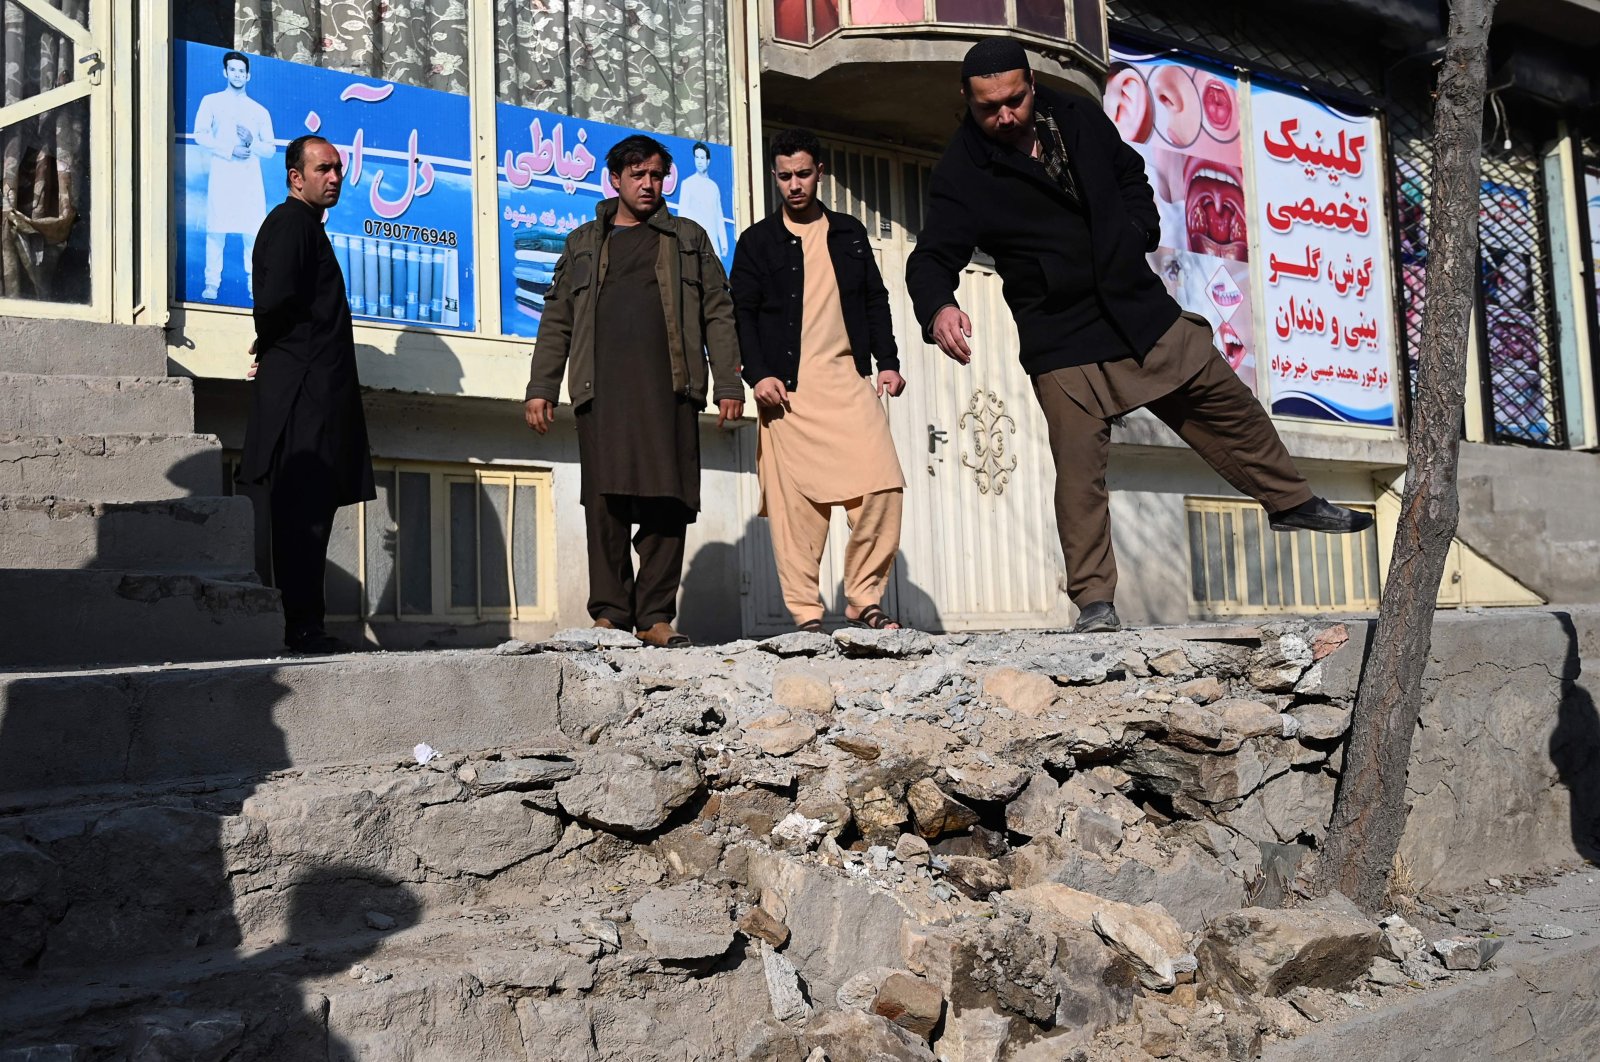 People gather at a site of a rocket attack at Khair Khana, northwest of Kabul, Afghanistan, Nov. 21, 2020. (AFP Photo)